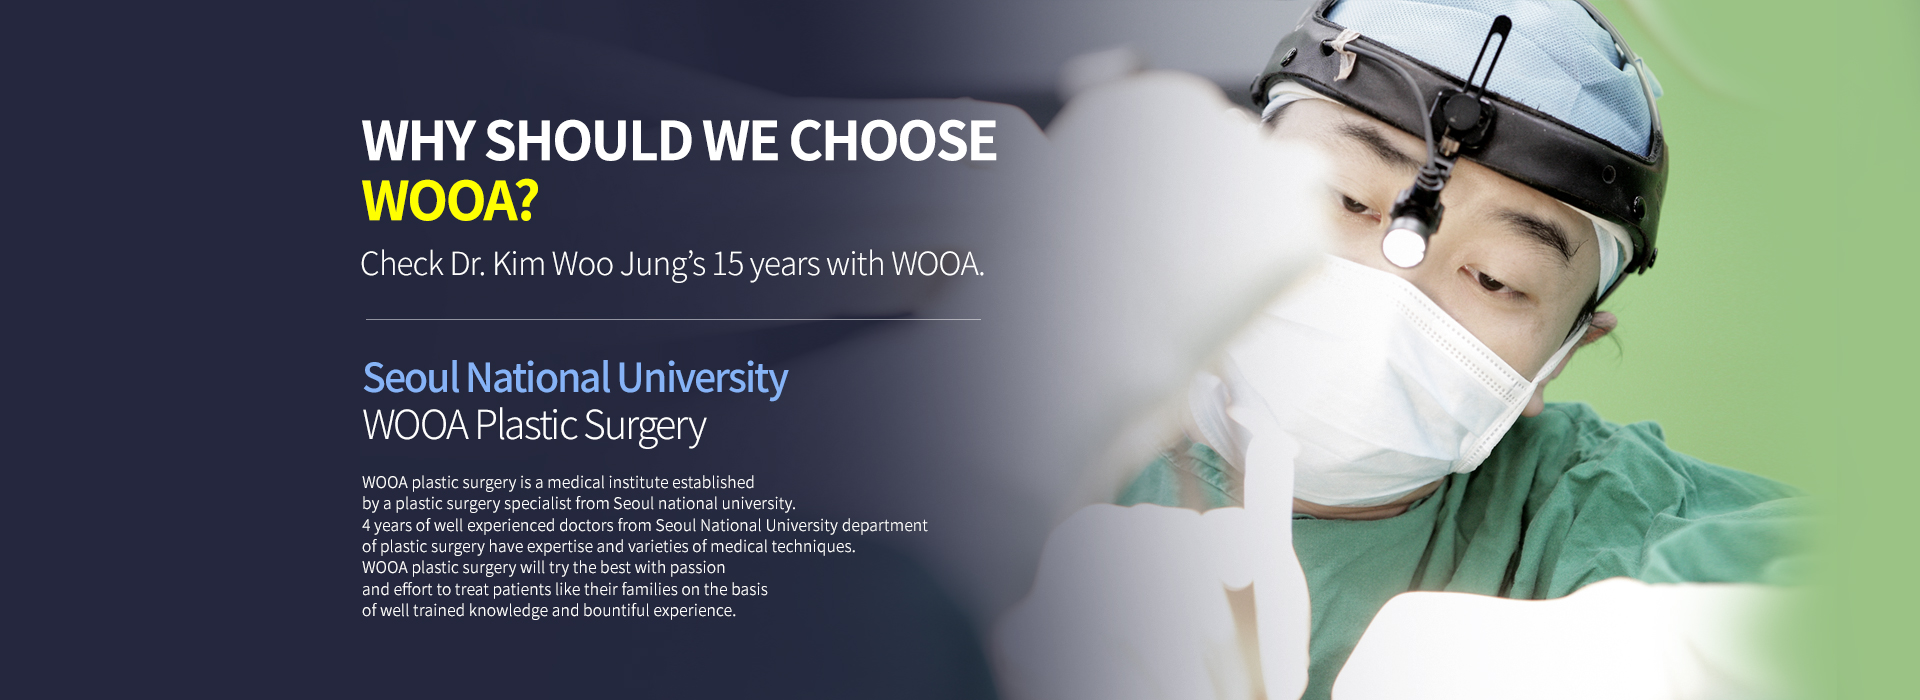 Why should we choose Apgujeong Regen? Check Dr. Kim Woo Jung’s 15 years with Regen. Seoul National University Apgujeong Regen Plastic Surgery Apgujeong Regen plastic surgery is a medical institute established by a plastic surgery specialist from Seoul national university. 4 years of well experienced doctors from Seoul National University department of plastic surgery have expertise and varieties of medical techniques. Apgujoeng Regen plastic surgery will try the best with passion and effort to treat patients like their families on the basis of well trained knowledge and bountiful experience.